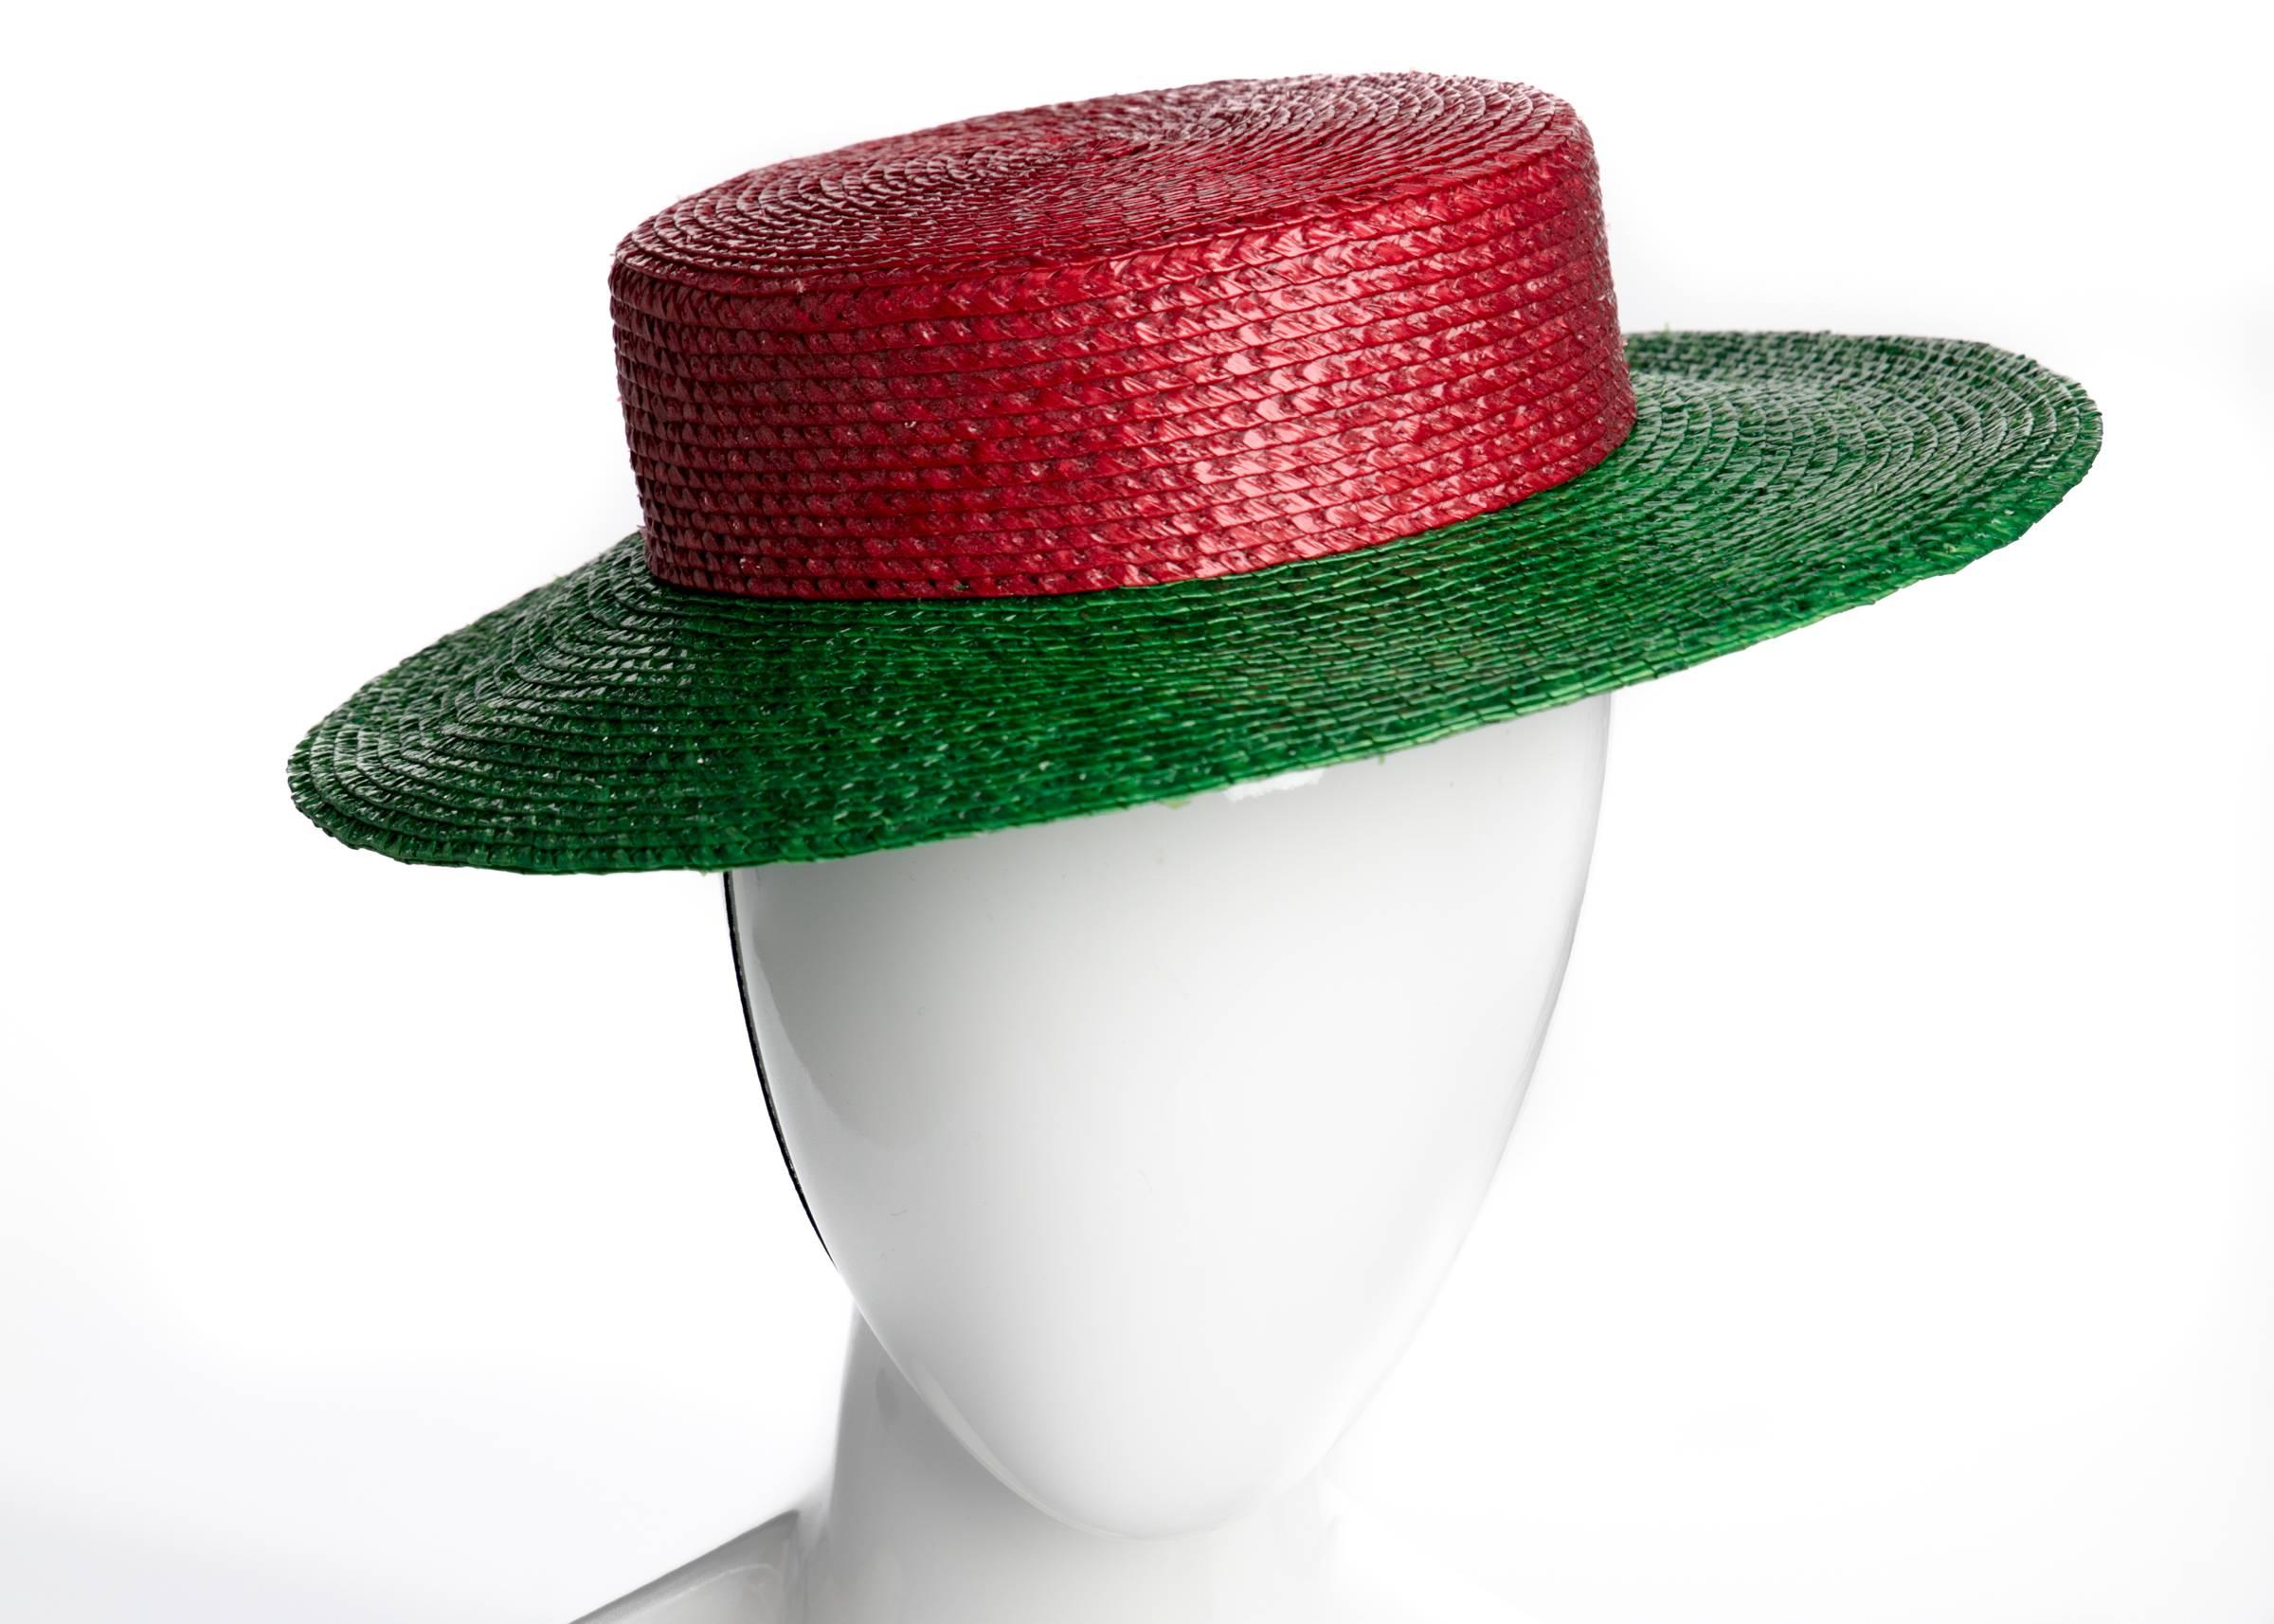 Women's 1980s Yves Saint Laurent YSL Vintage Glossy Red and Green Straw Hat 